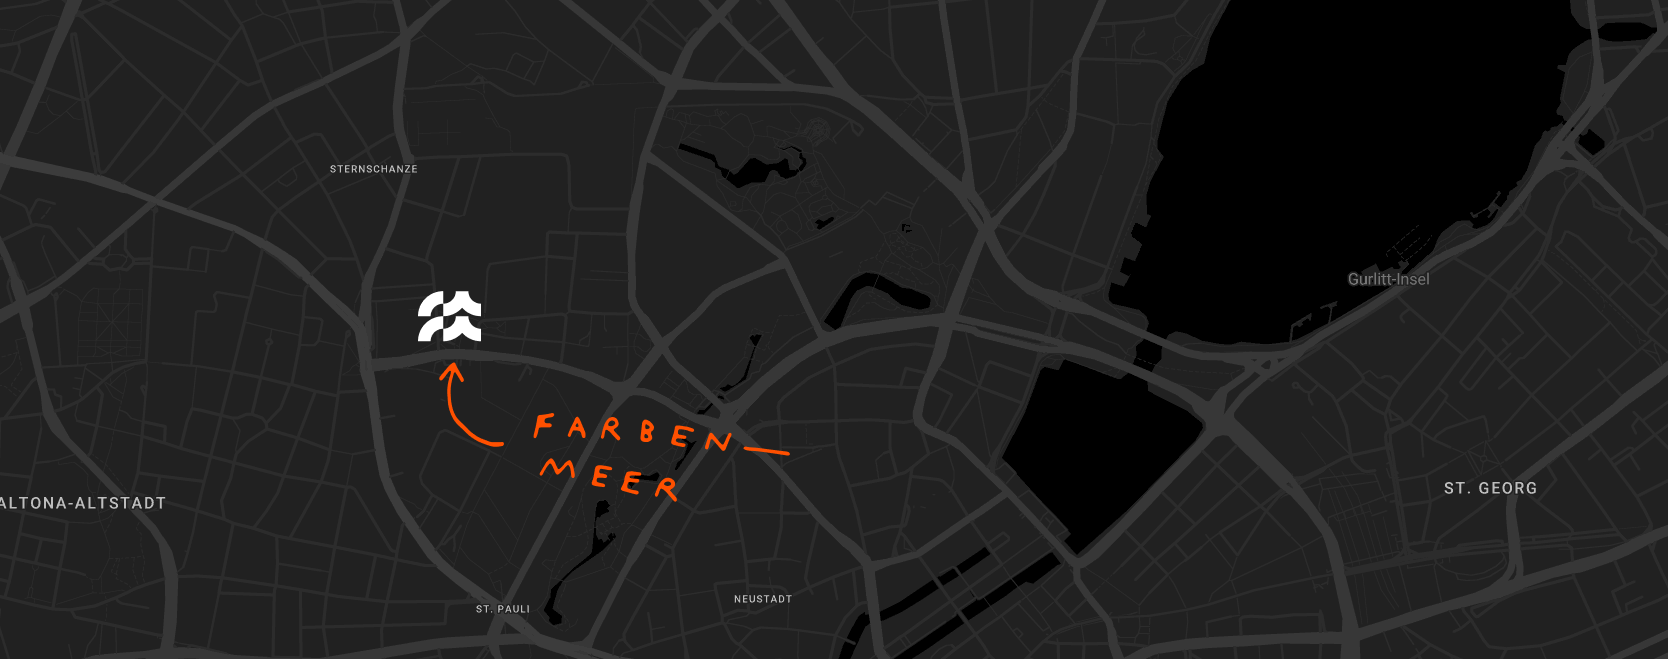 Abstract map showing location of farbenmeer